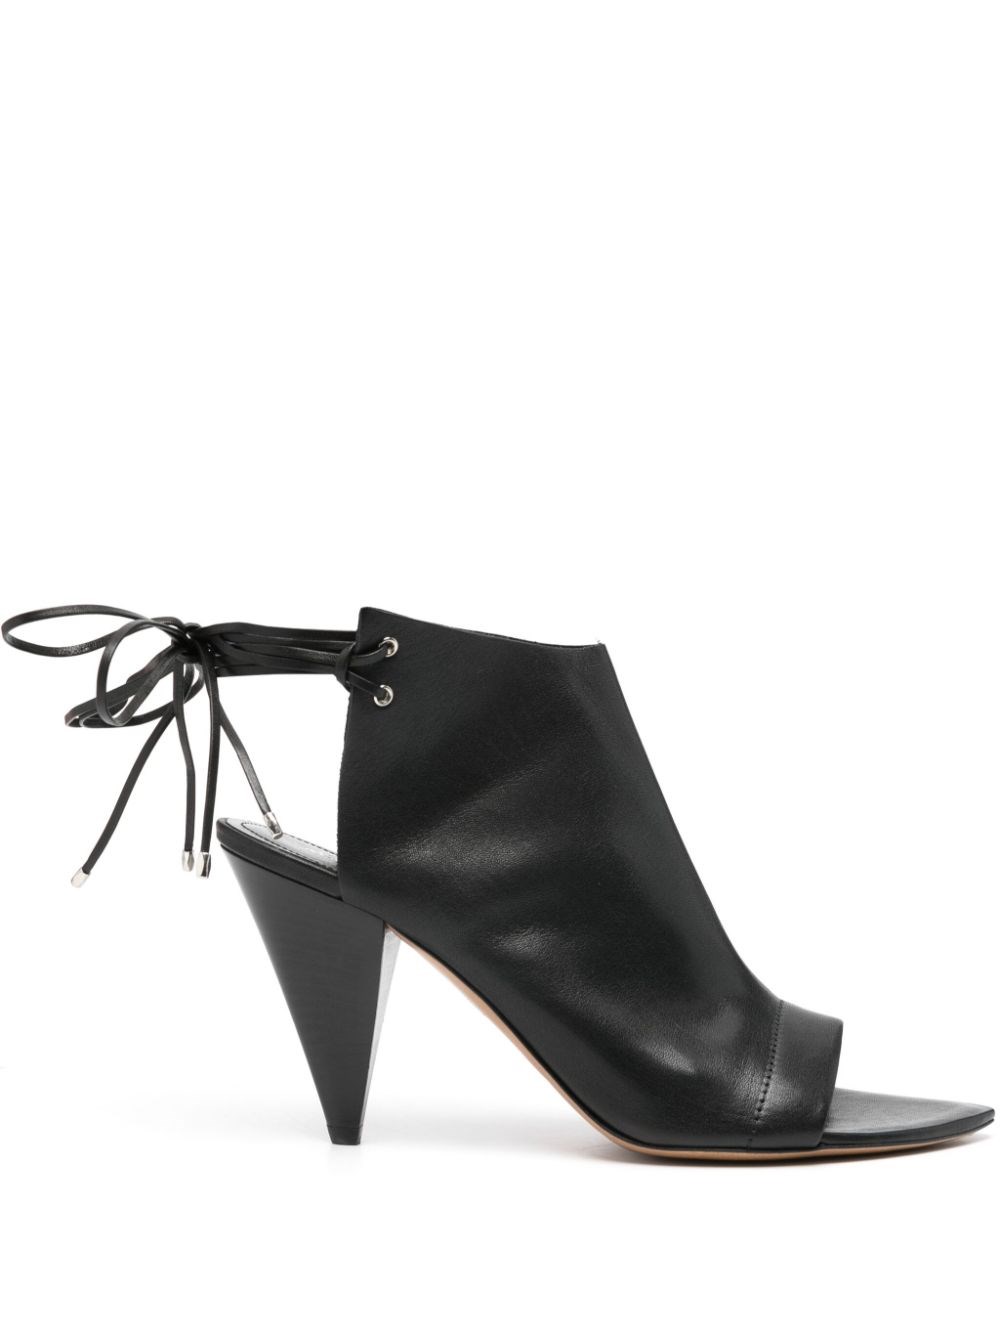 Isabel Marant Dulsy 90mm Leather Sandals In Black